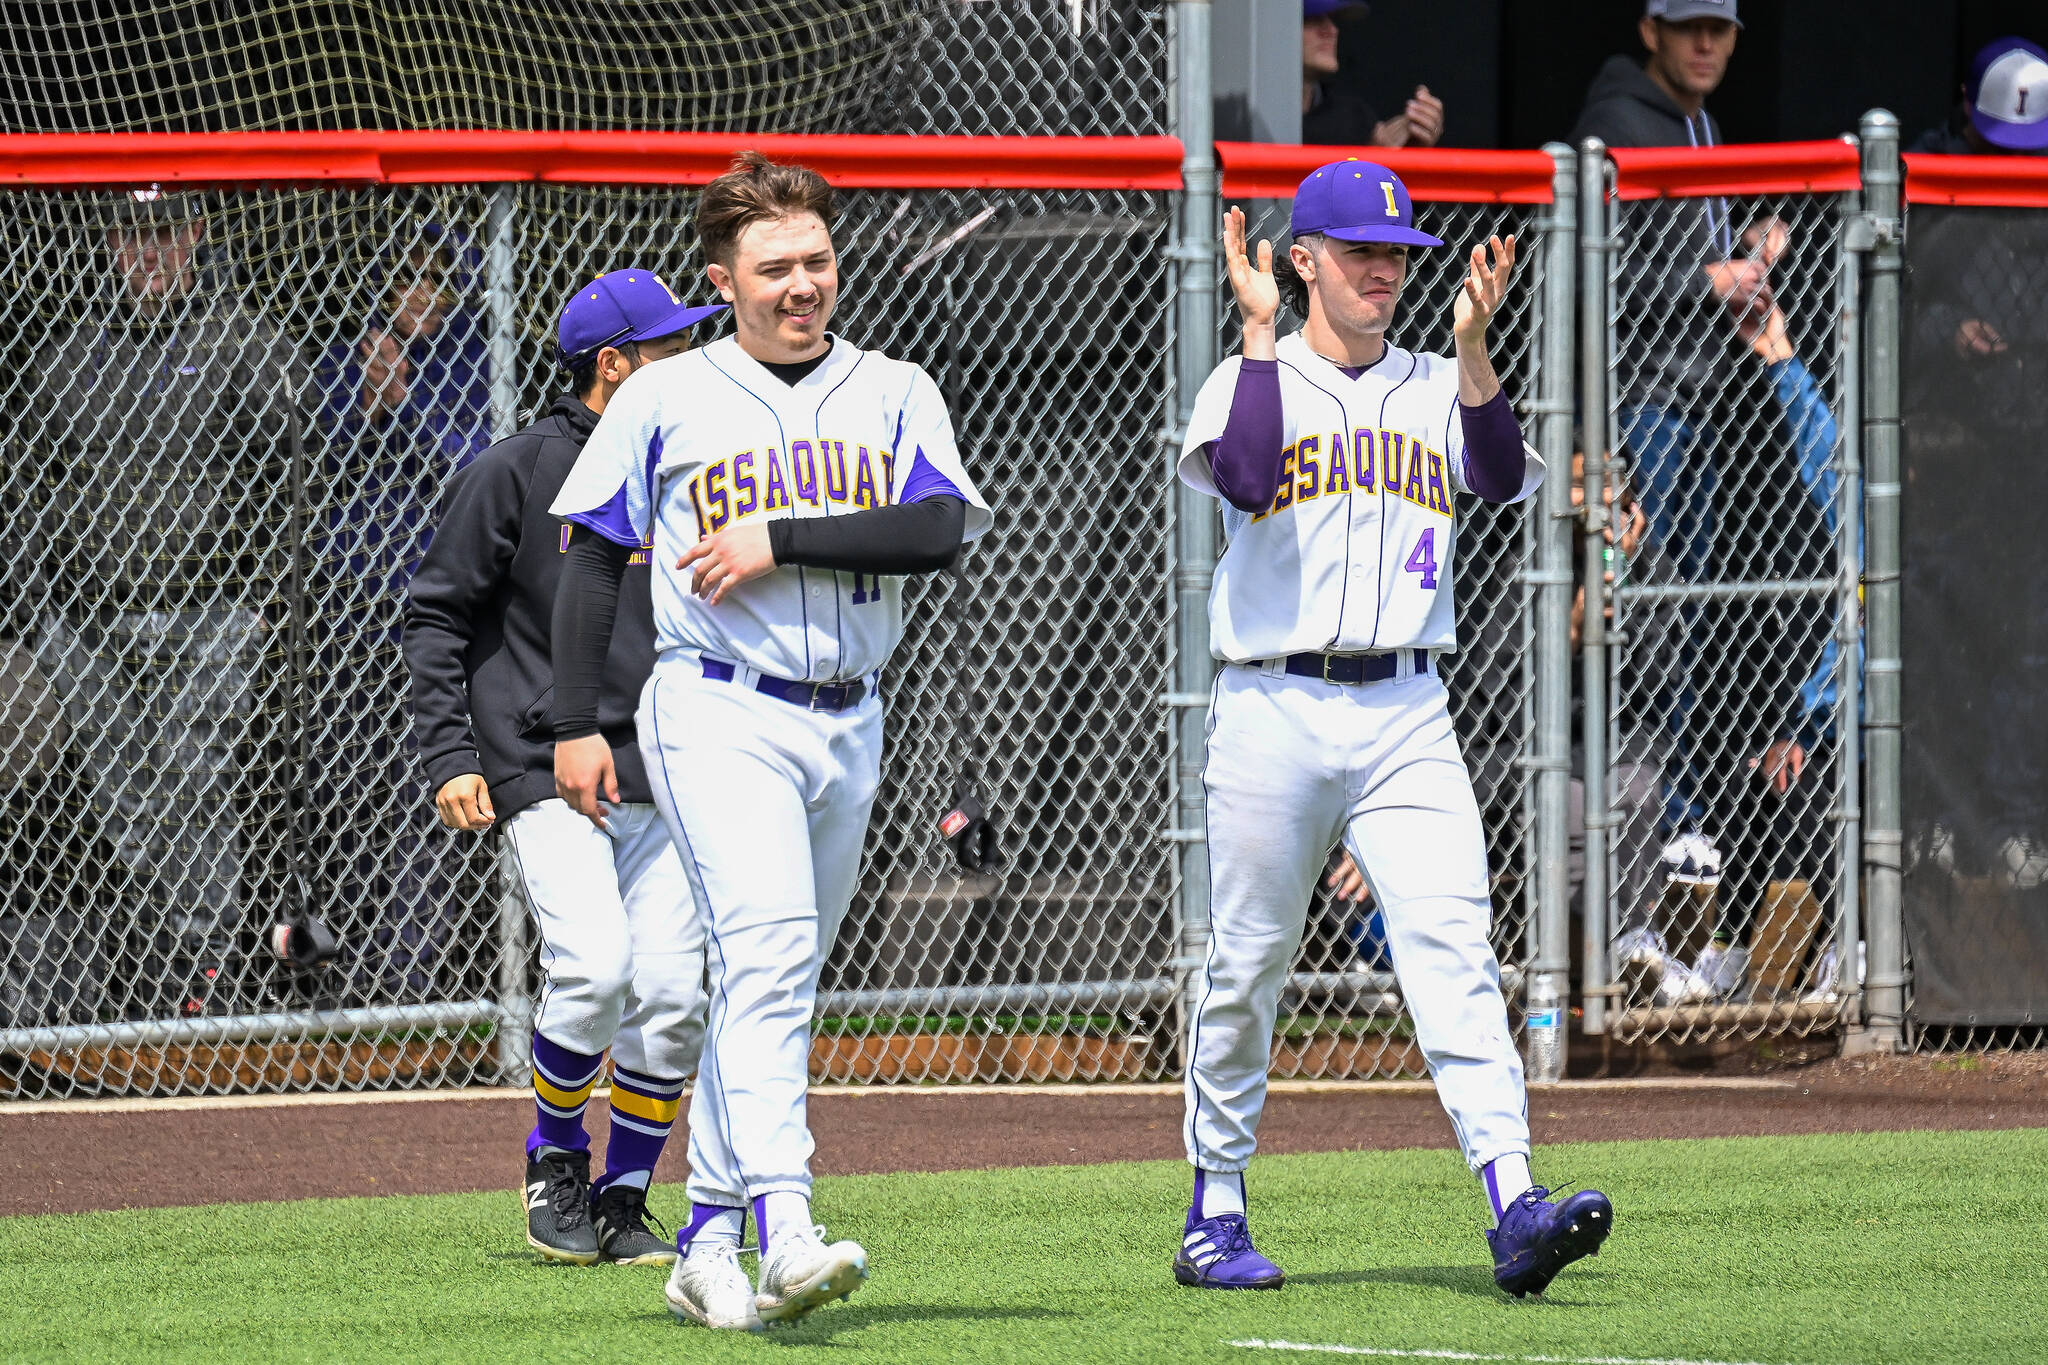 Joey Wilner (#11) and Dominic Guistino (#4) walk onto the field with smiles on May 7. Courtesy of Patrick Krohn.